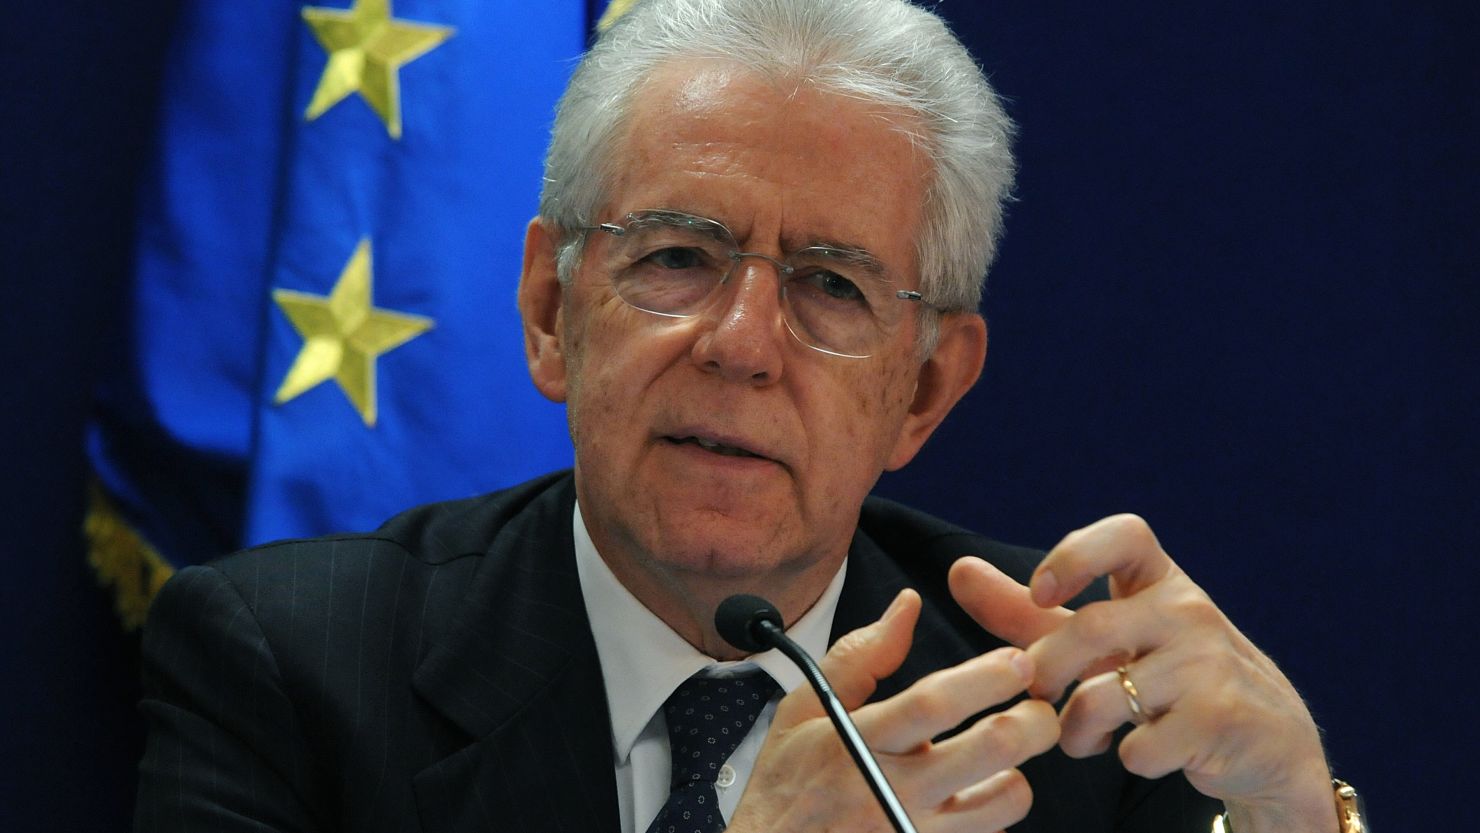 Italian Prime Minister Mario Monti, seen in this May 2012 file photo, says his country will continue to support Afghanistan.